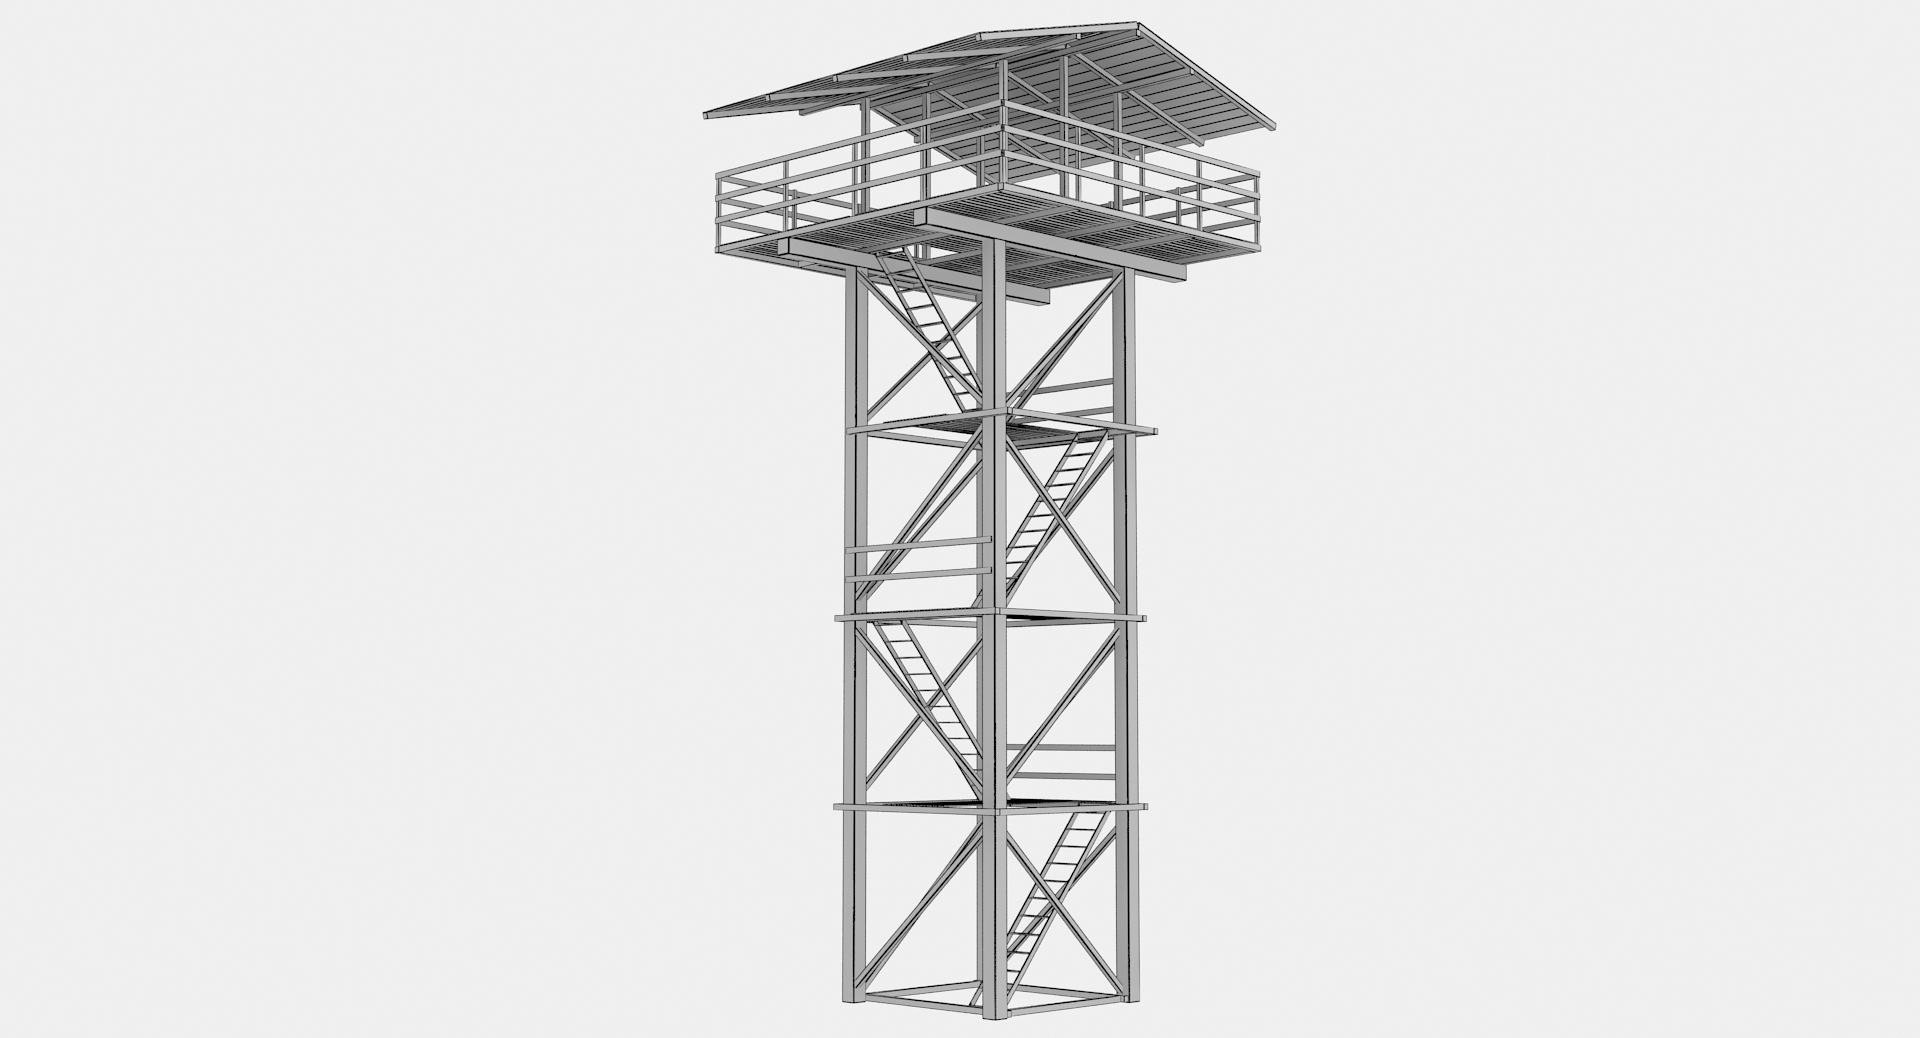 Observation tower - Wikipedia